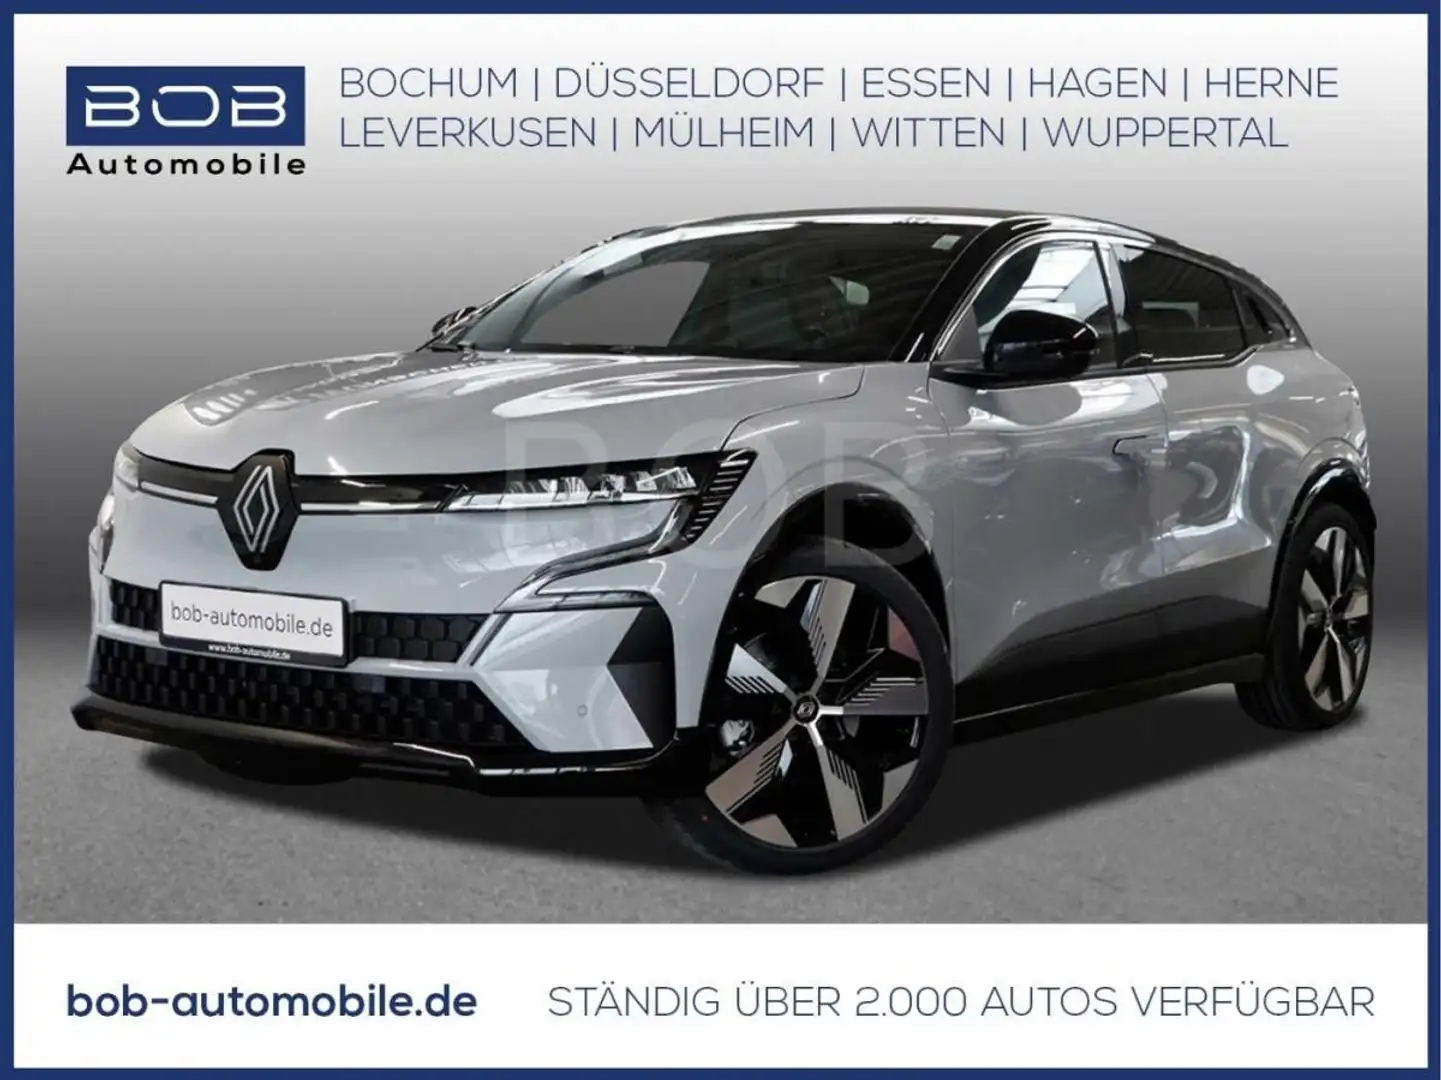 Renault Megane Leasing ohne Anzahlung